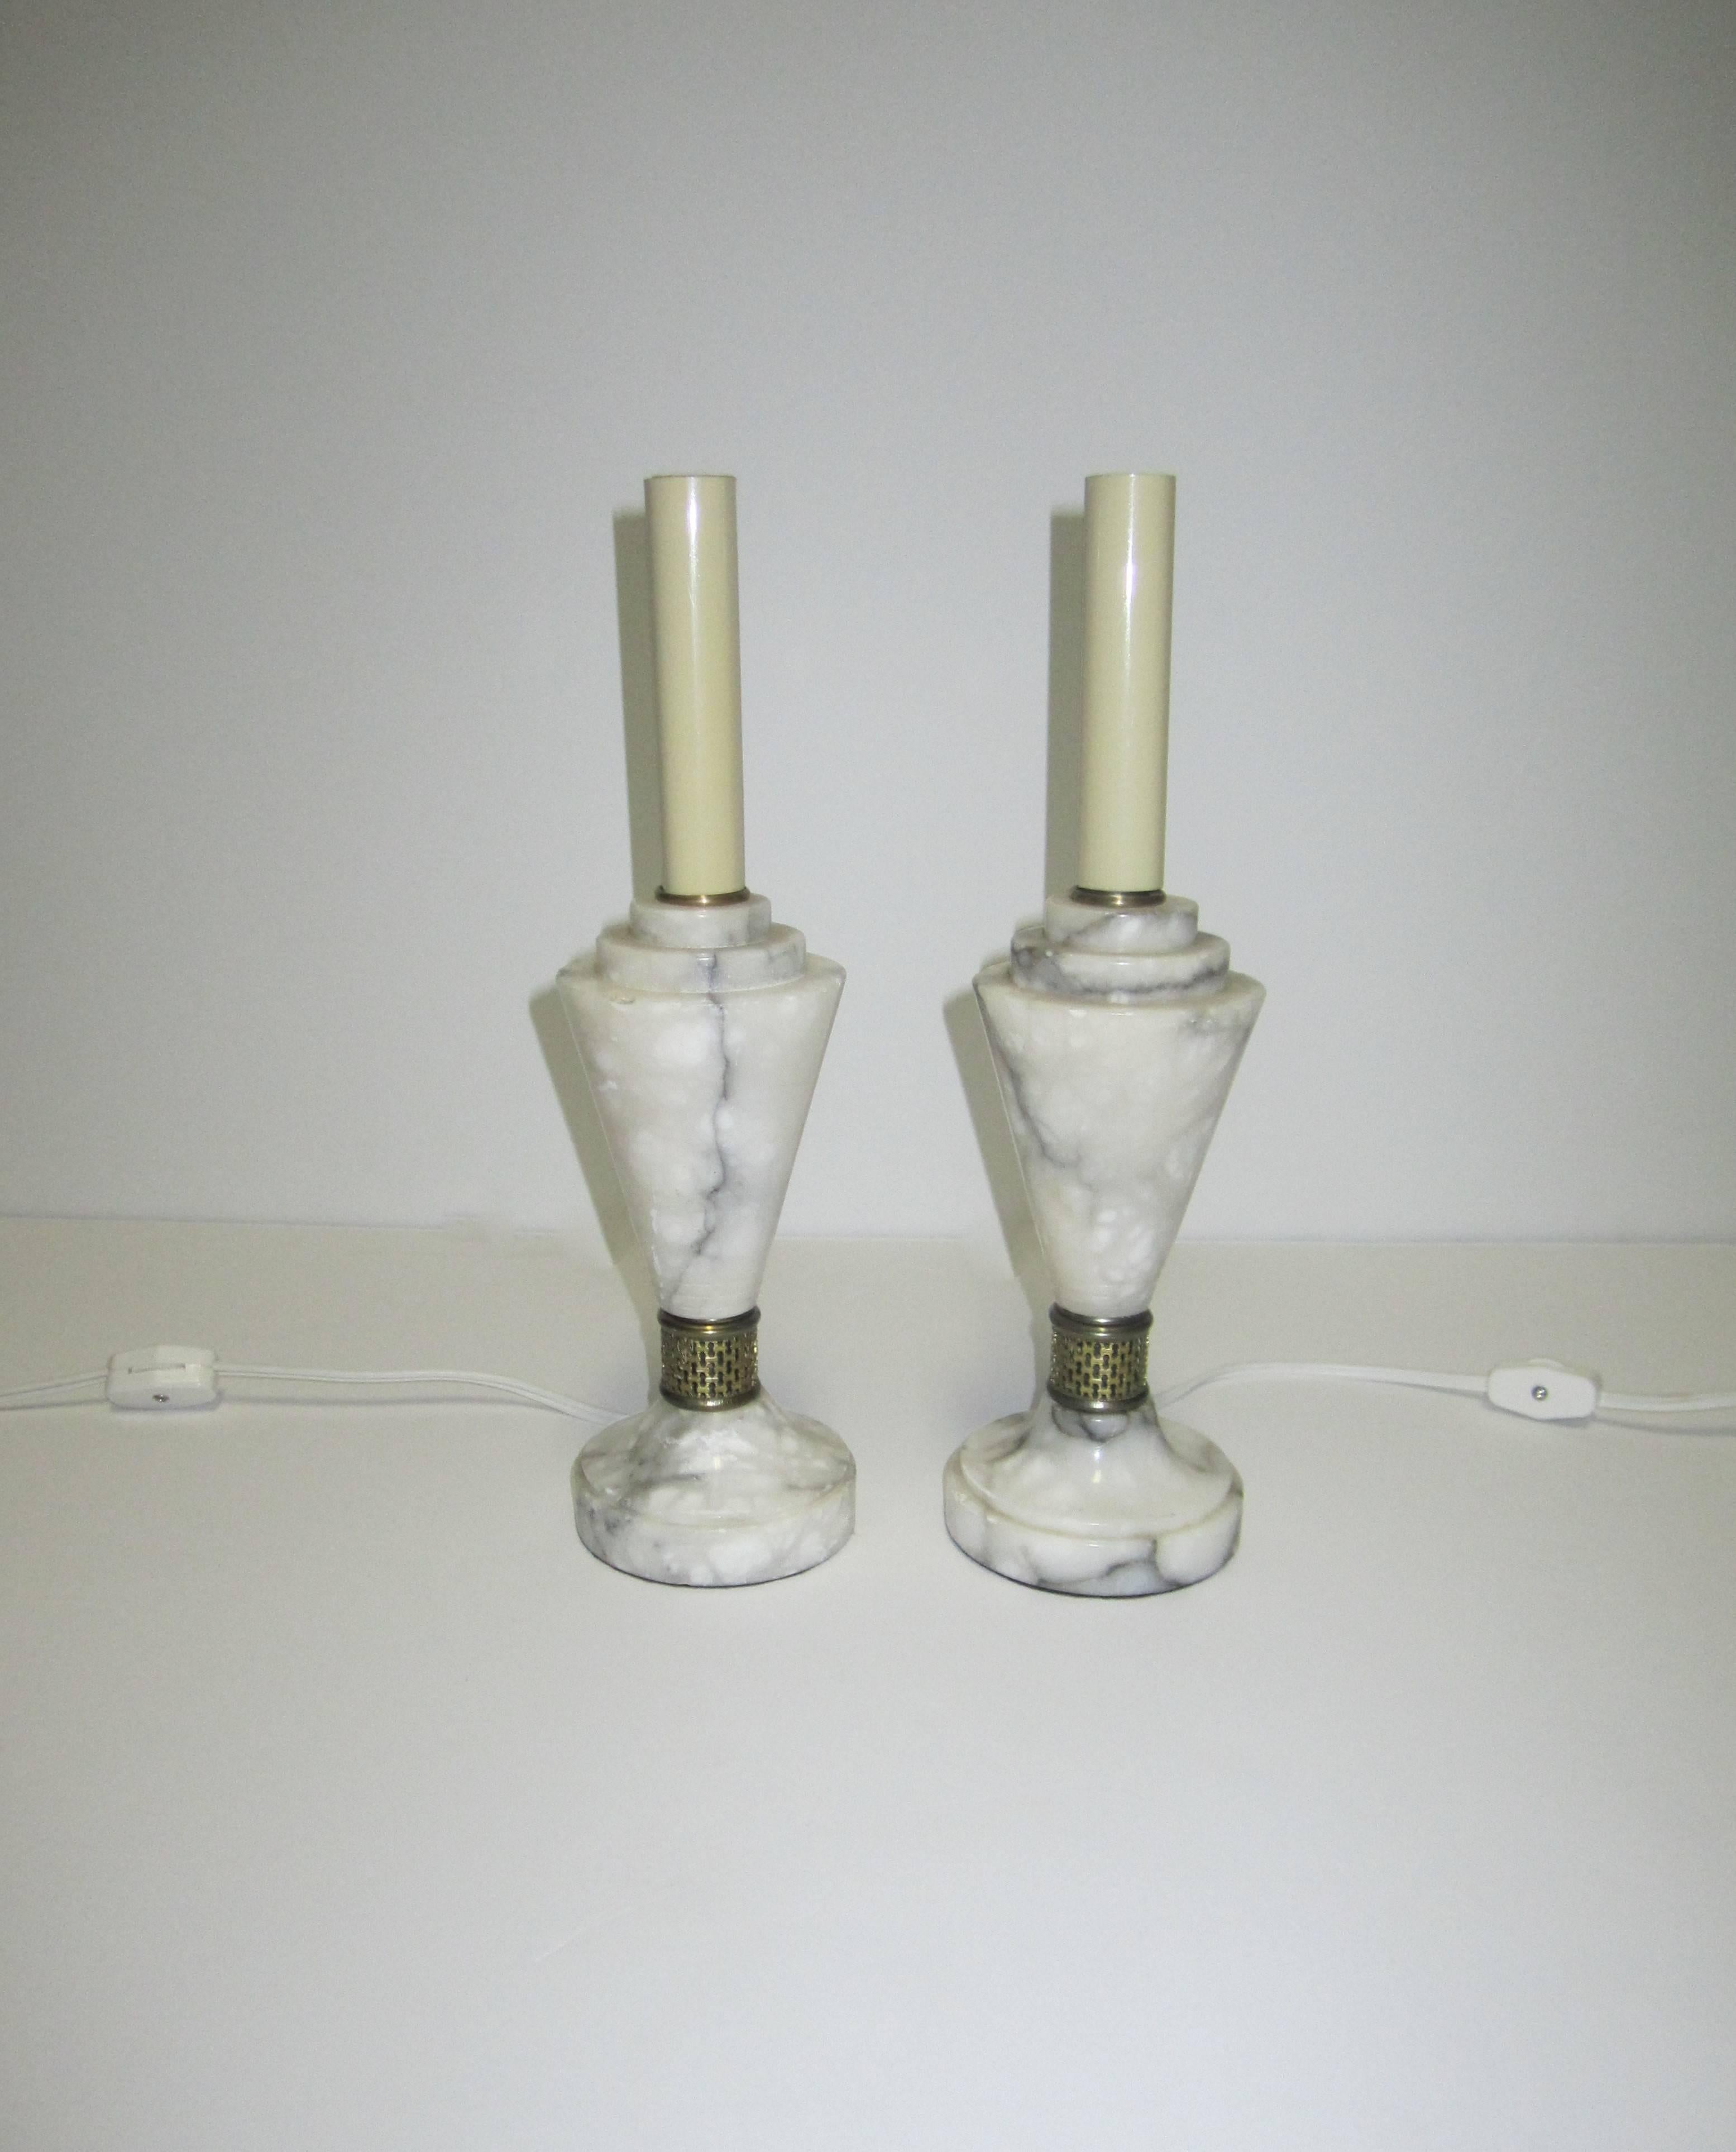 Carrara Marble Art Deco Modern Marble Table Lamps, Pair For Sale